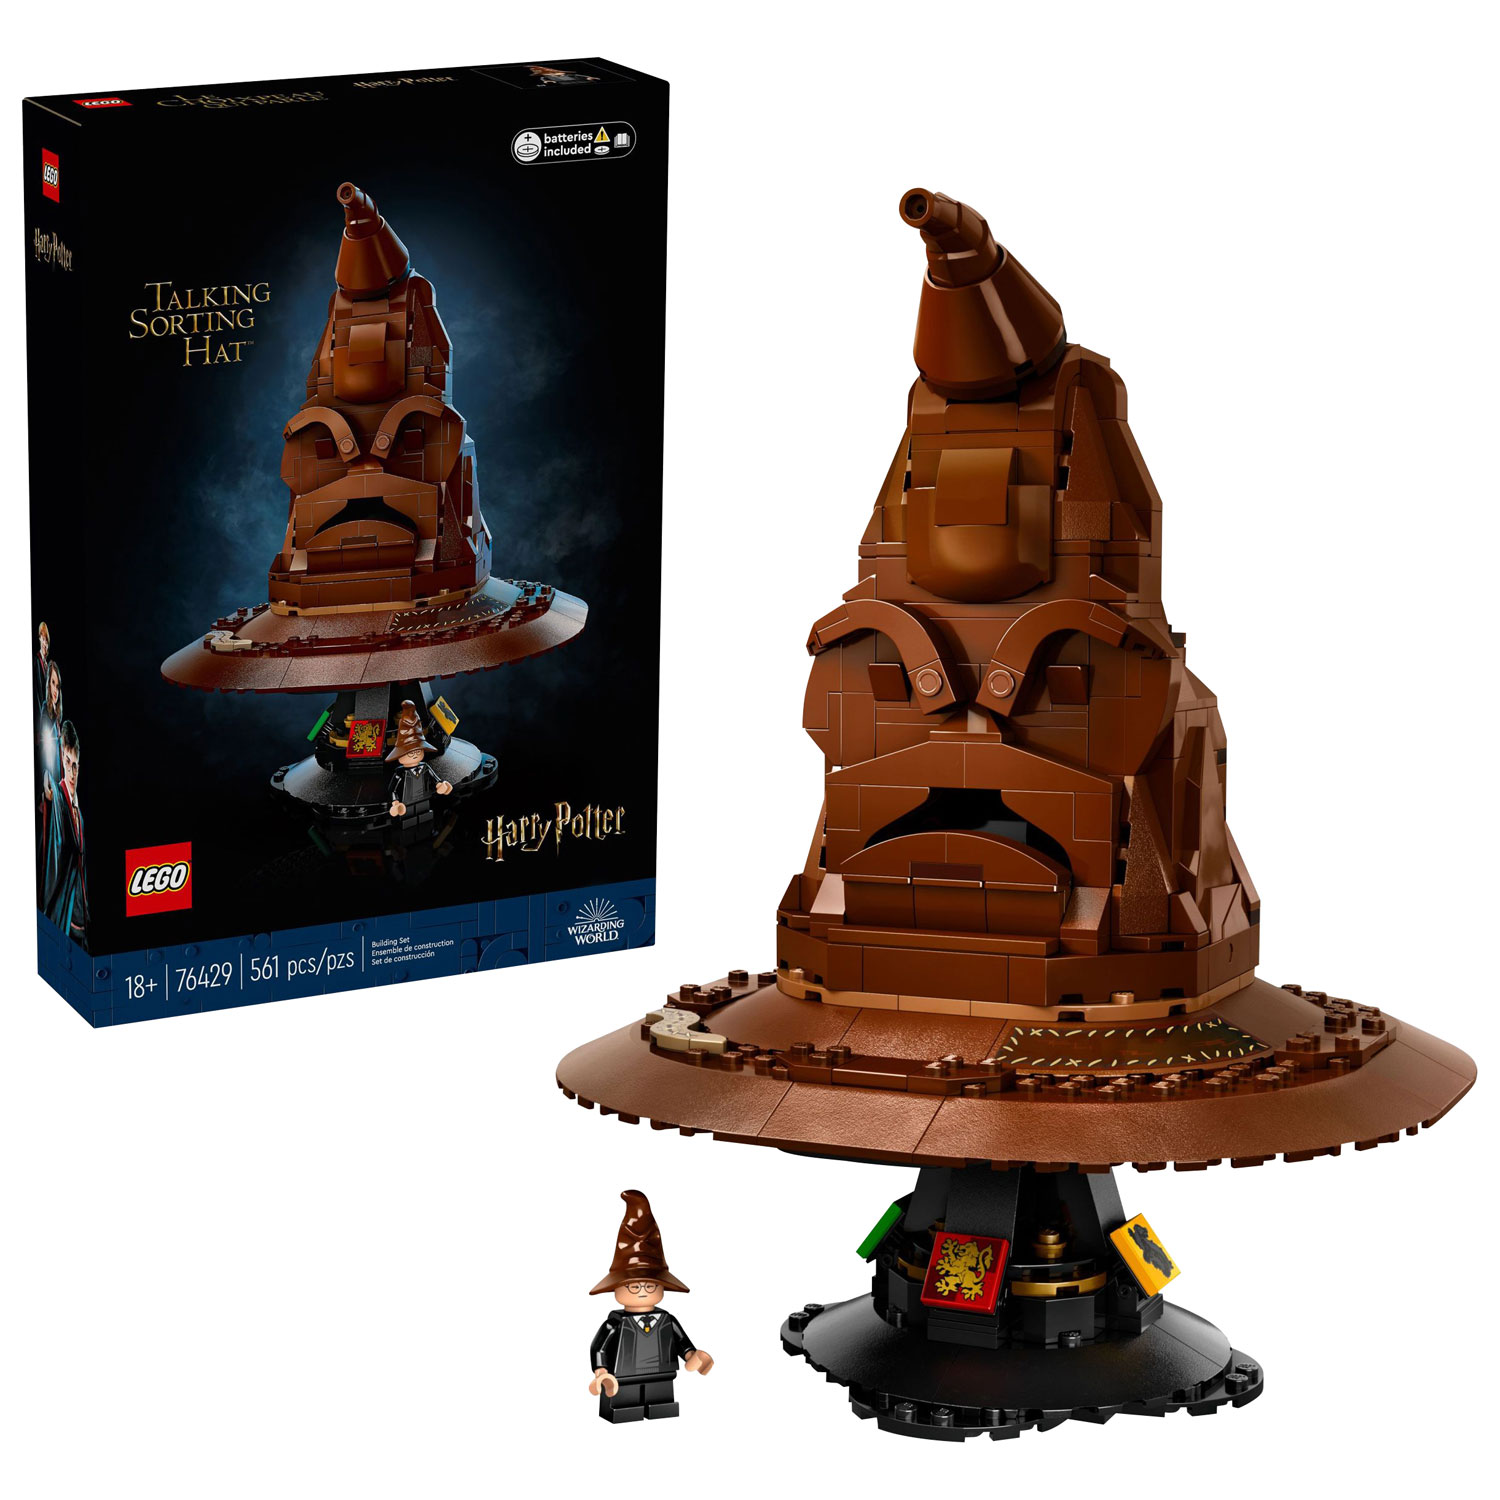 LEGO Harry Potter: Hogwarts Talking Sorting Hat Playset - 561 Pieces (76429)